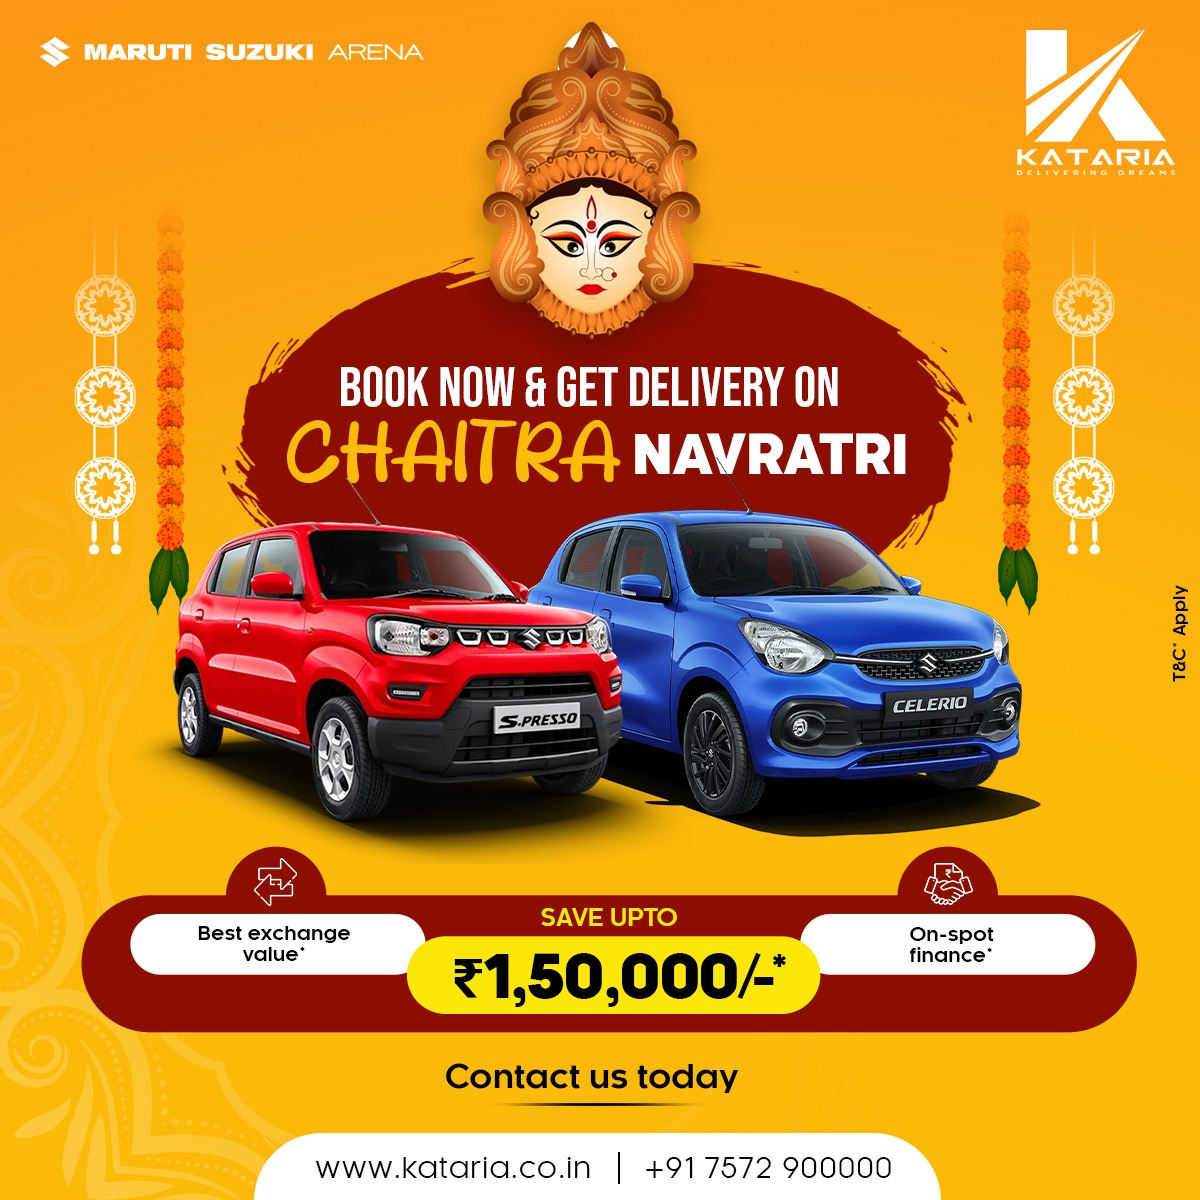 Savings up to ₹1,50,000* are waiting, featuring exclusive offers on the best exchange price.

Mail us at leads@kataria.co.in or call us at +91 7572900000

#kataria #katariaautomobiles #KatariaCare #BuyYourOwnCar #BuyFromKataria #Arena #MSArena #chaitranavratri #Navratri